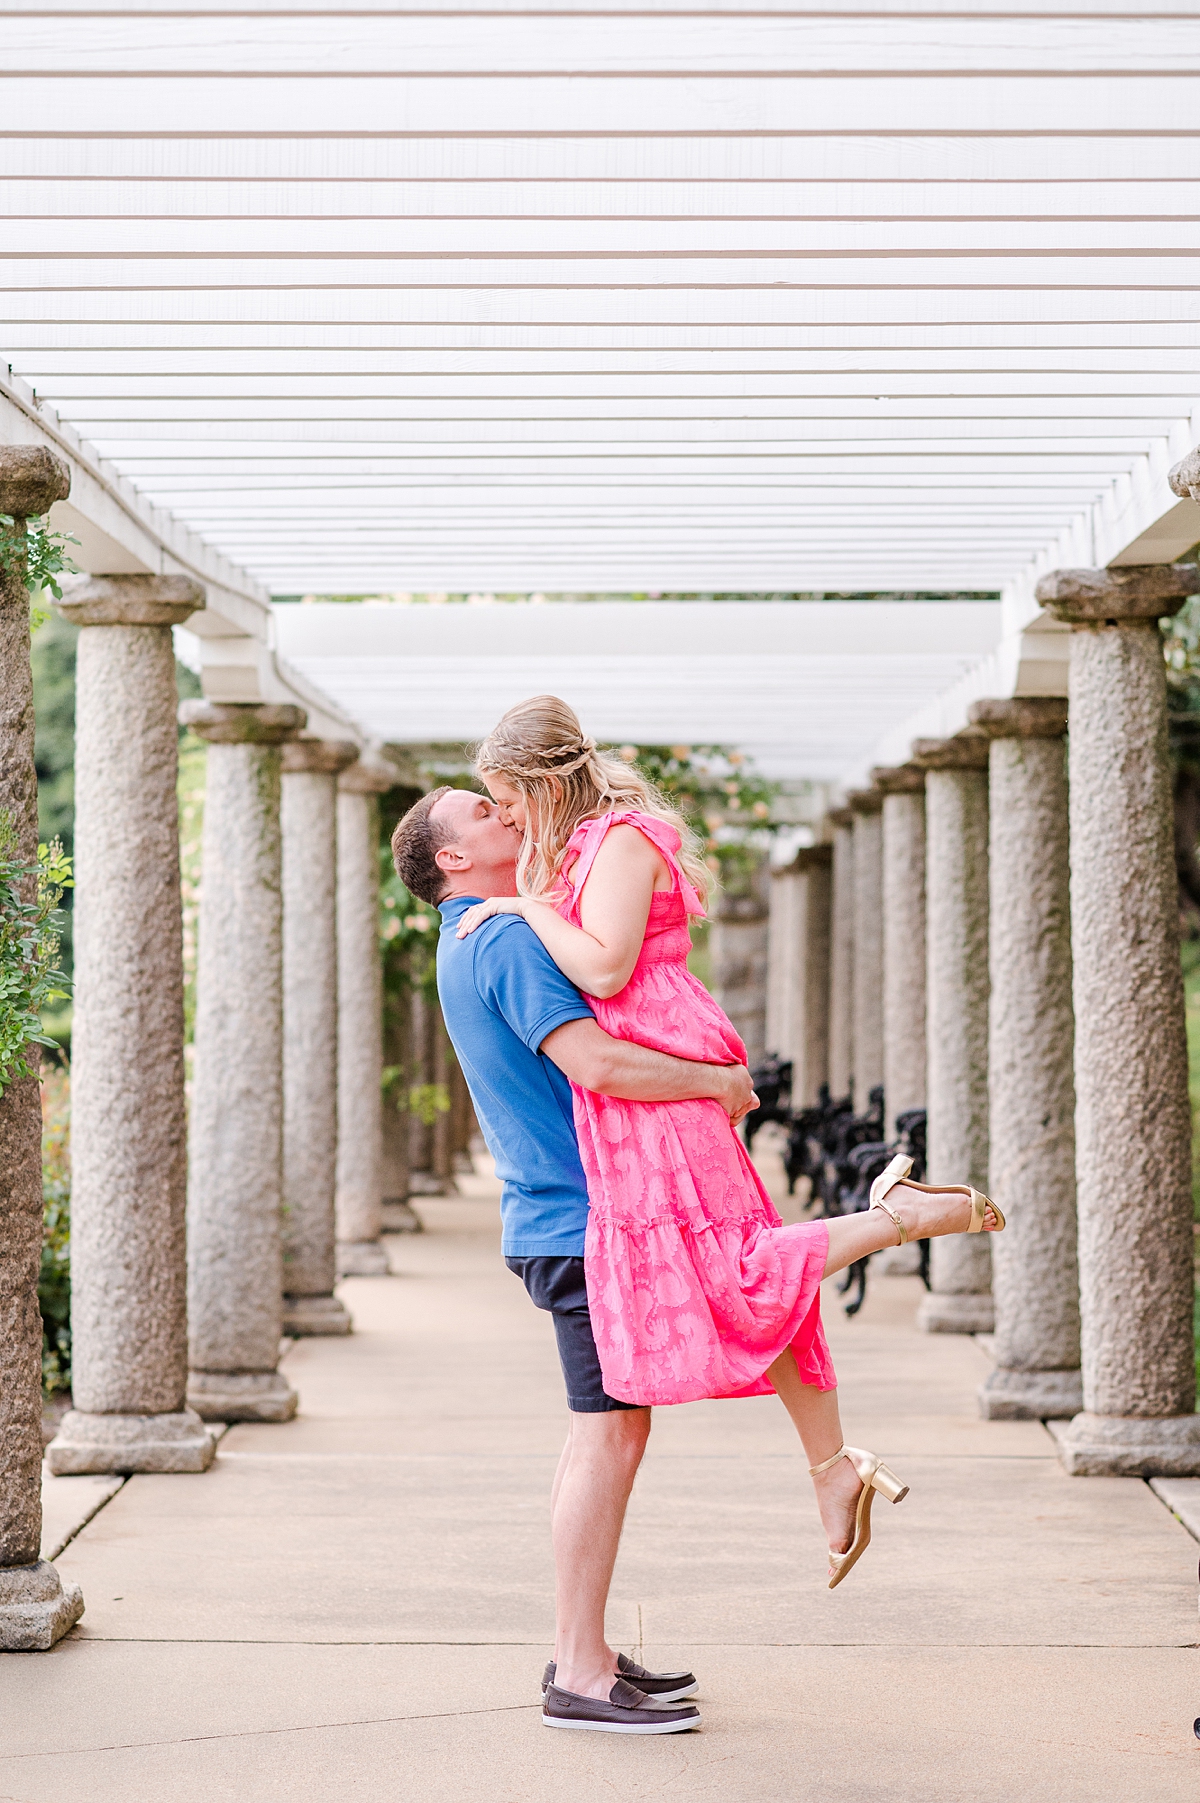 Scissor Kick Kiss During Spring Maymont Engagement Session in Richmond, Virginia. Photography by Richmond Wedding Photographer Kailey Brianne Photography. 